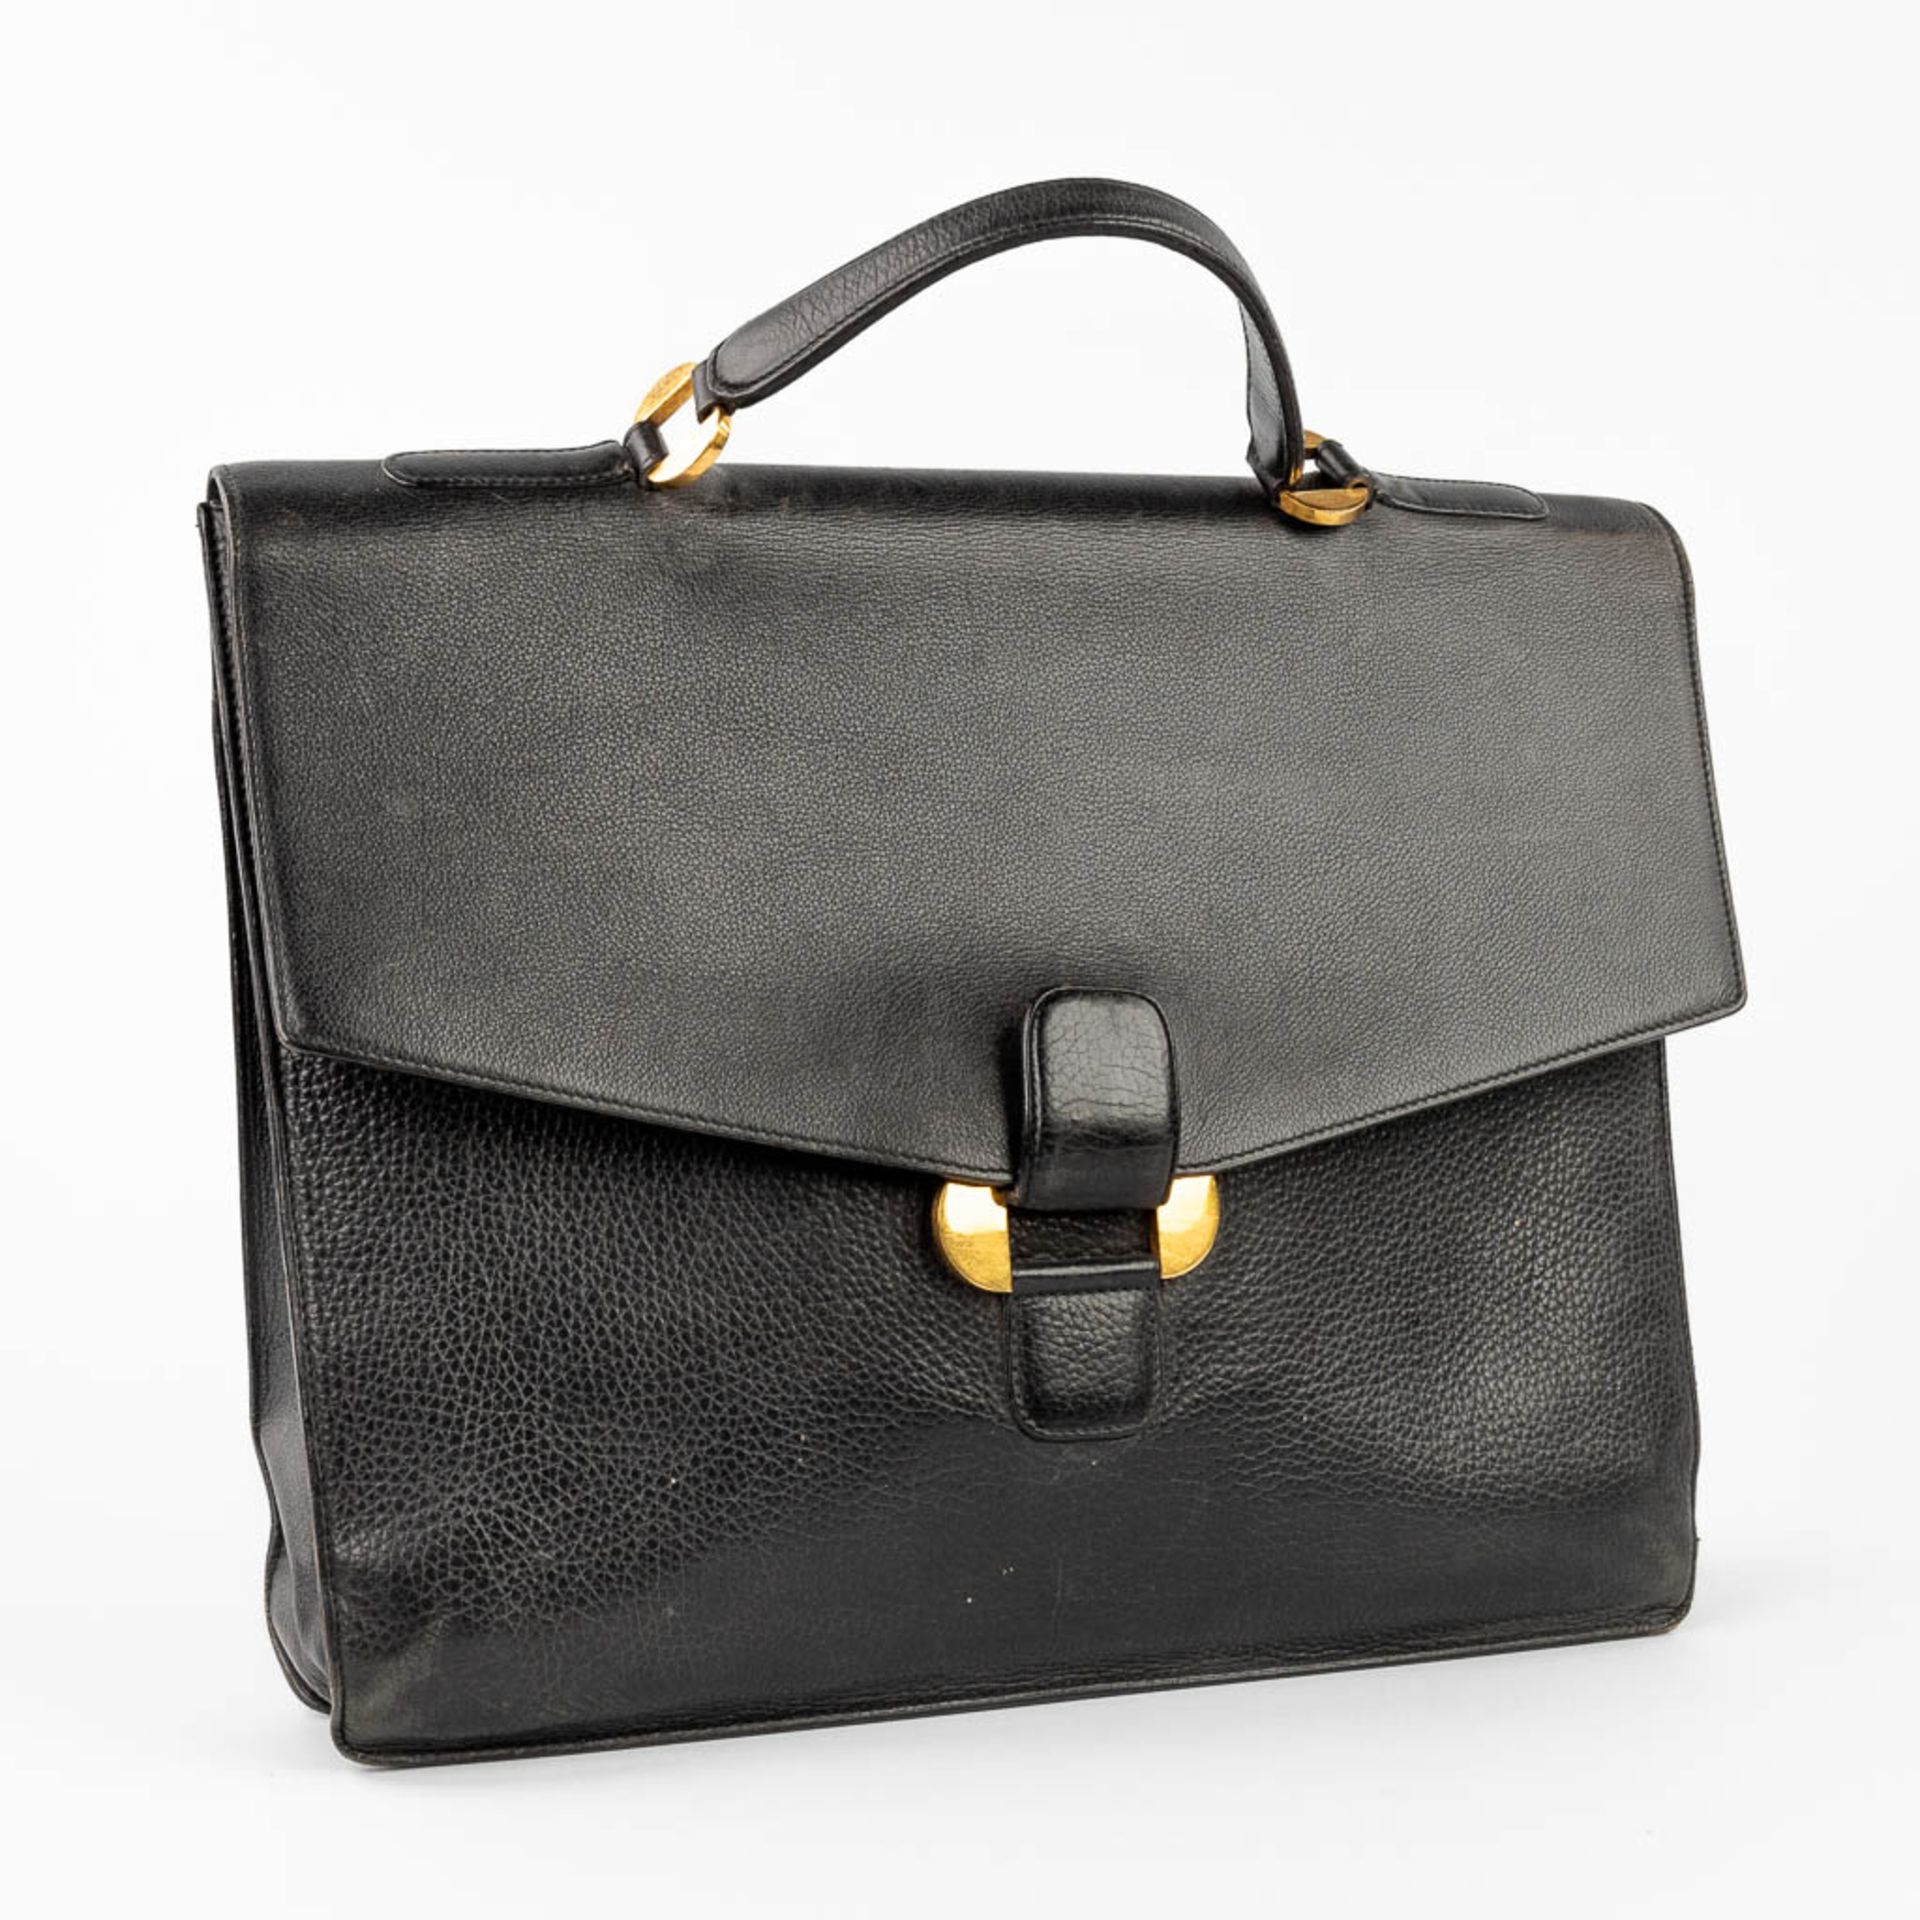 Delvaux, a suitcase made of black leather with gold-plated elements. (W:39 x H:33 cm) - Image 8 of 16